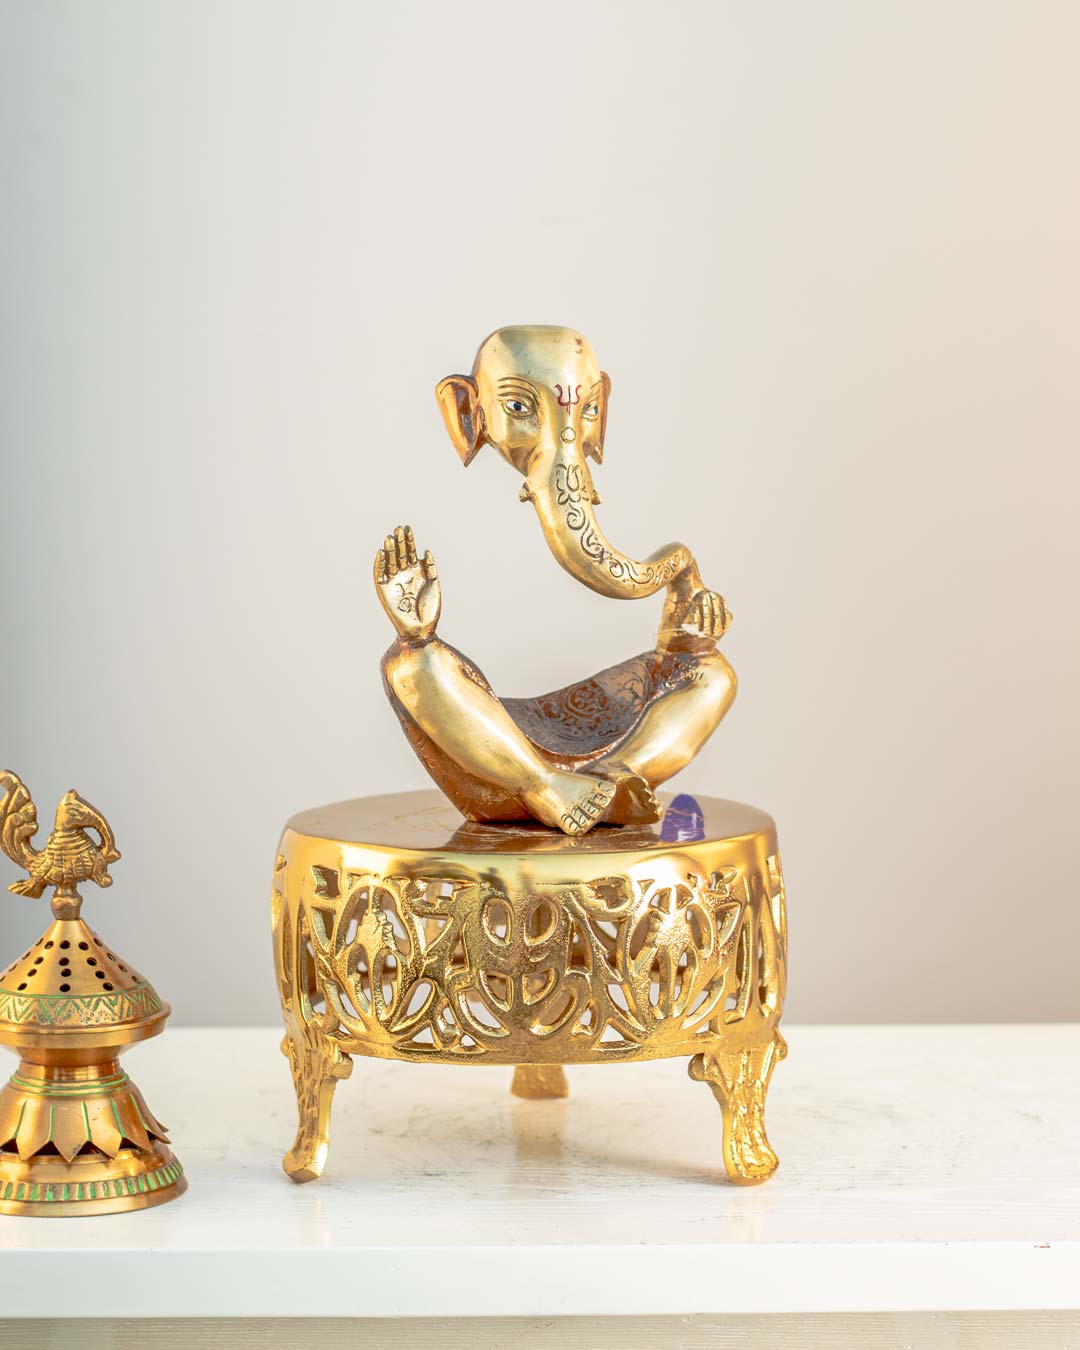 Marvelous Golden 'lord Ganesh' Table Top sculpture